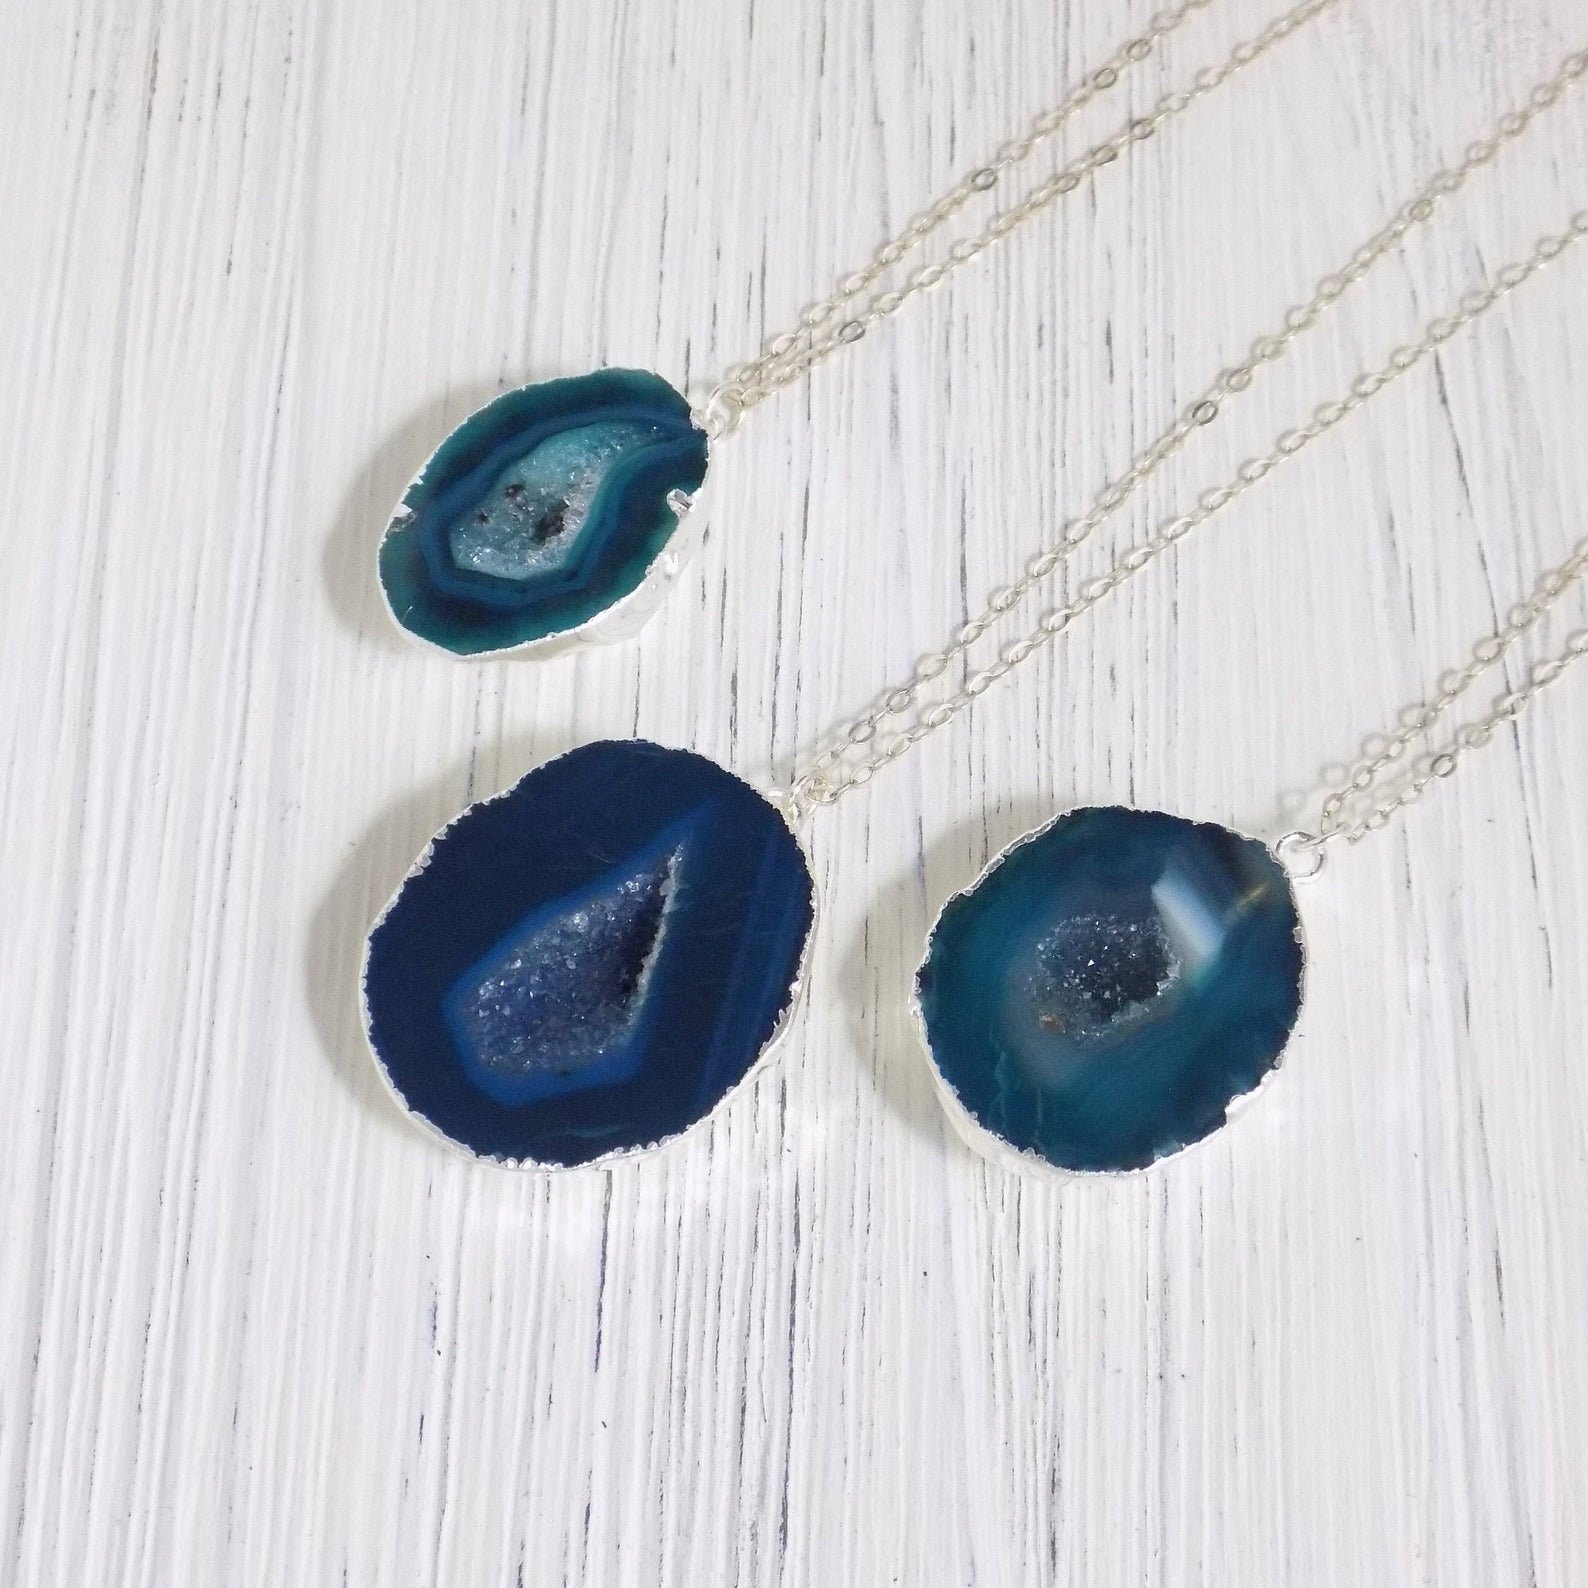 Bohemian Jewelry, Teal Blue Geode Necklace, Boho Necklace, Silver Geode Pendant, Druzy Pendant, Small Gemstone Necklace, Gift for Her G9-911